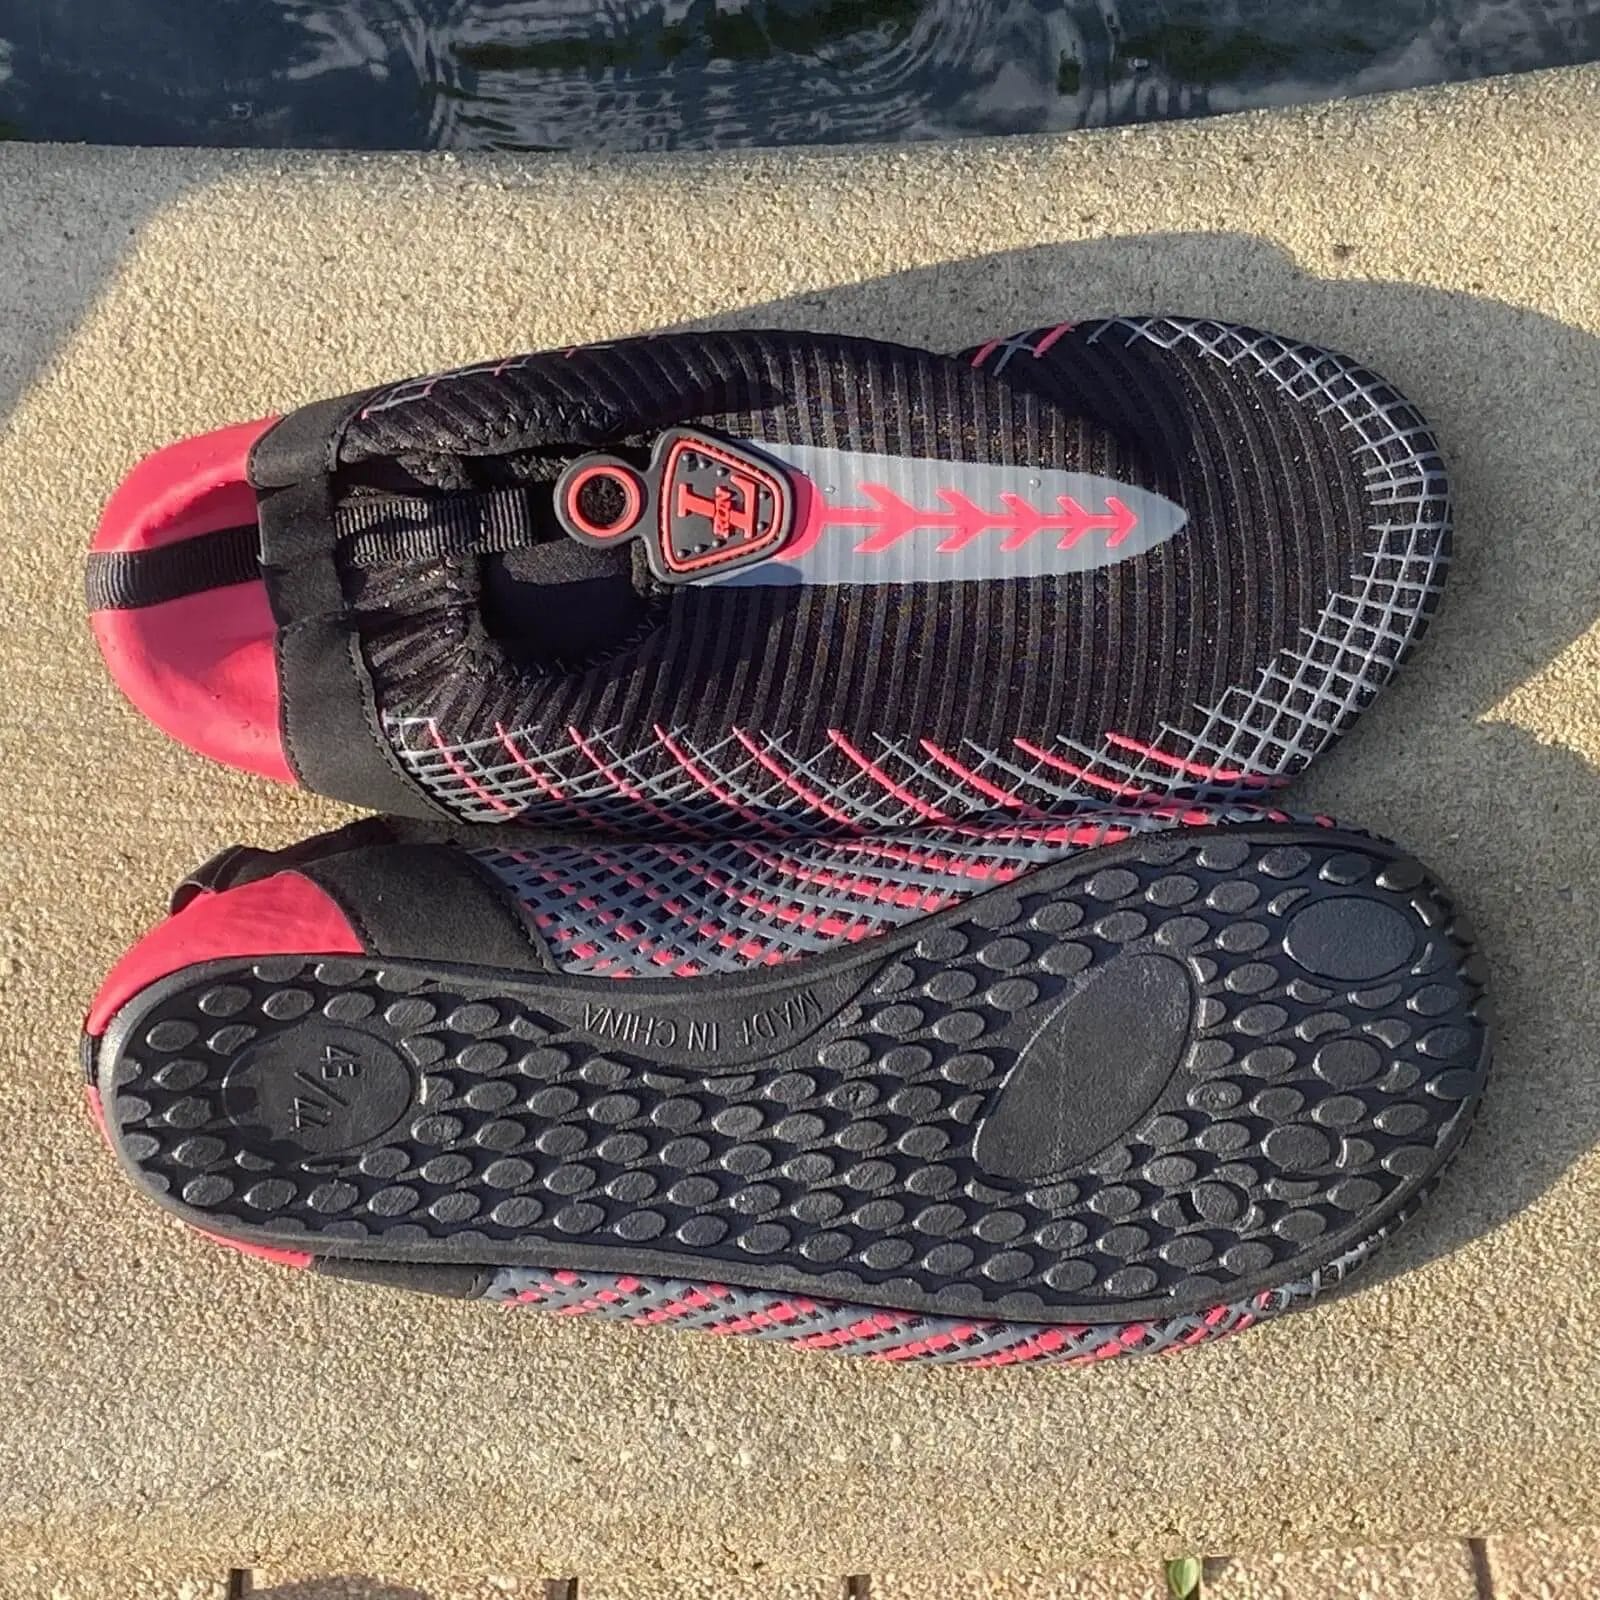 The Merrell Choprock Is My New Go-To Water Shoe